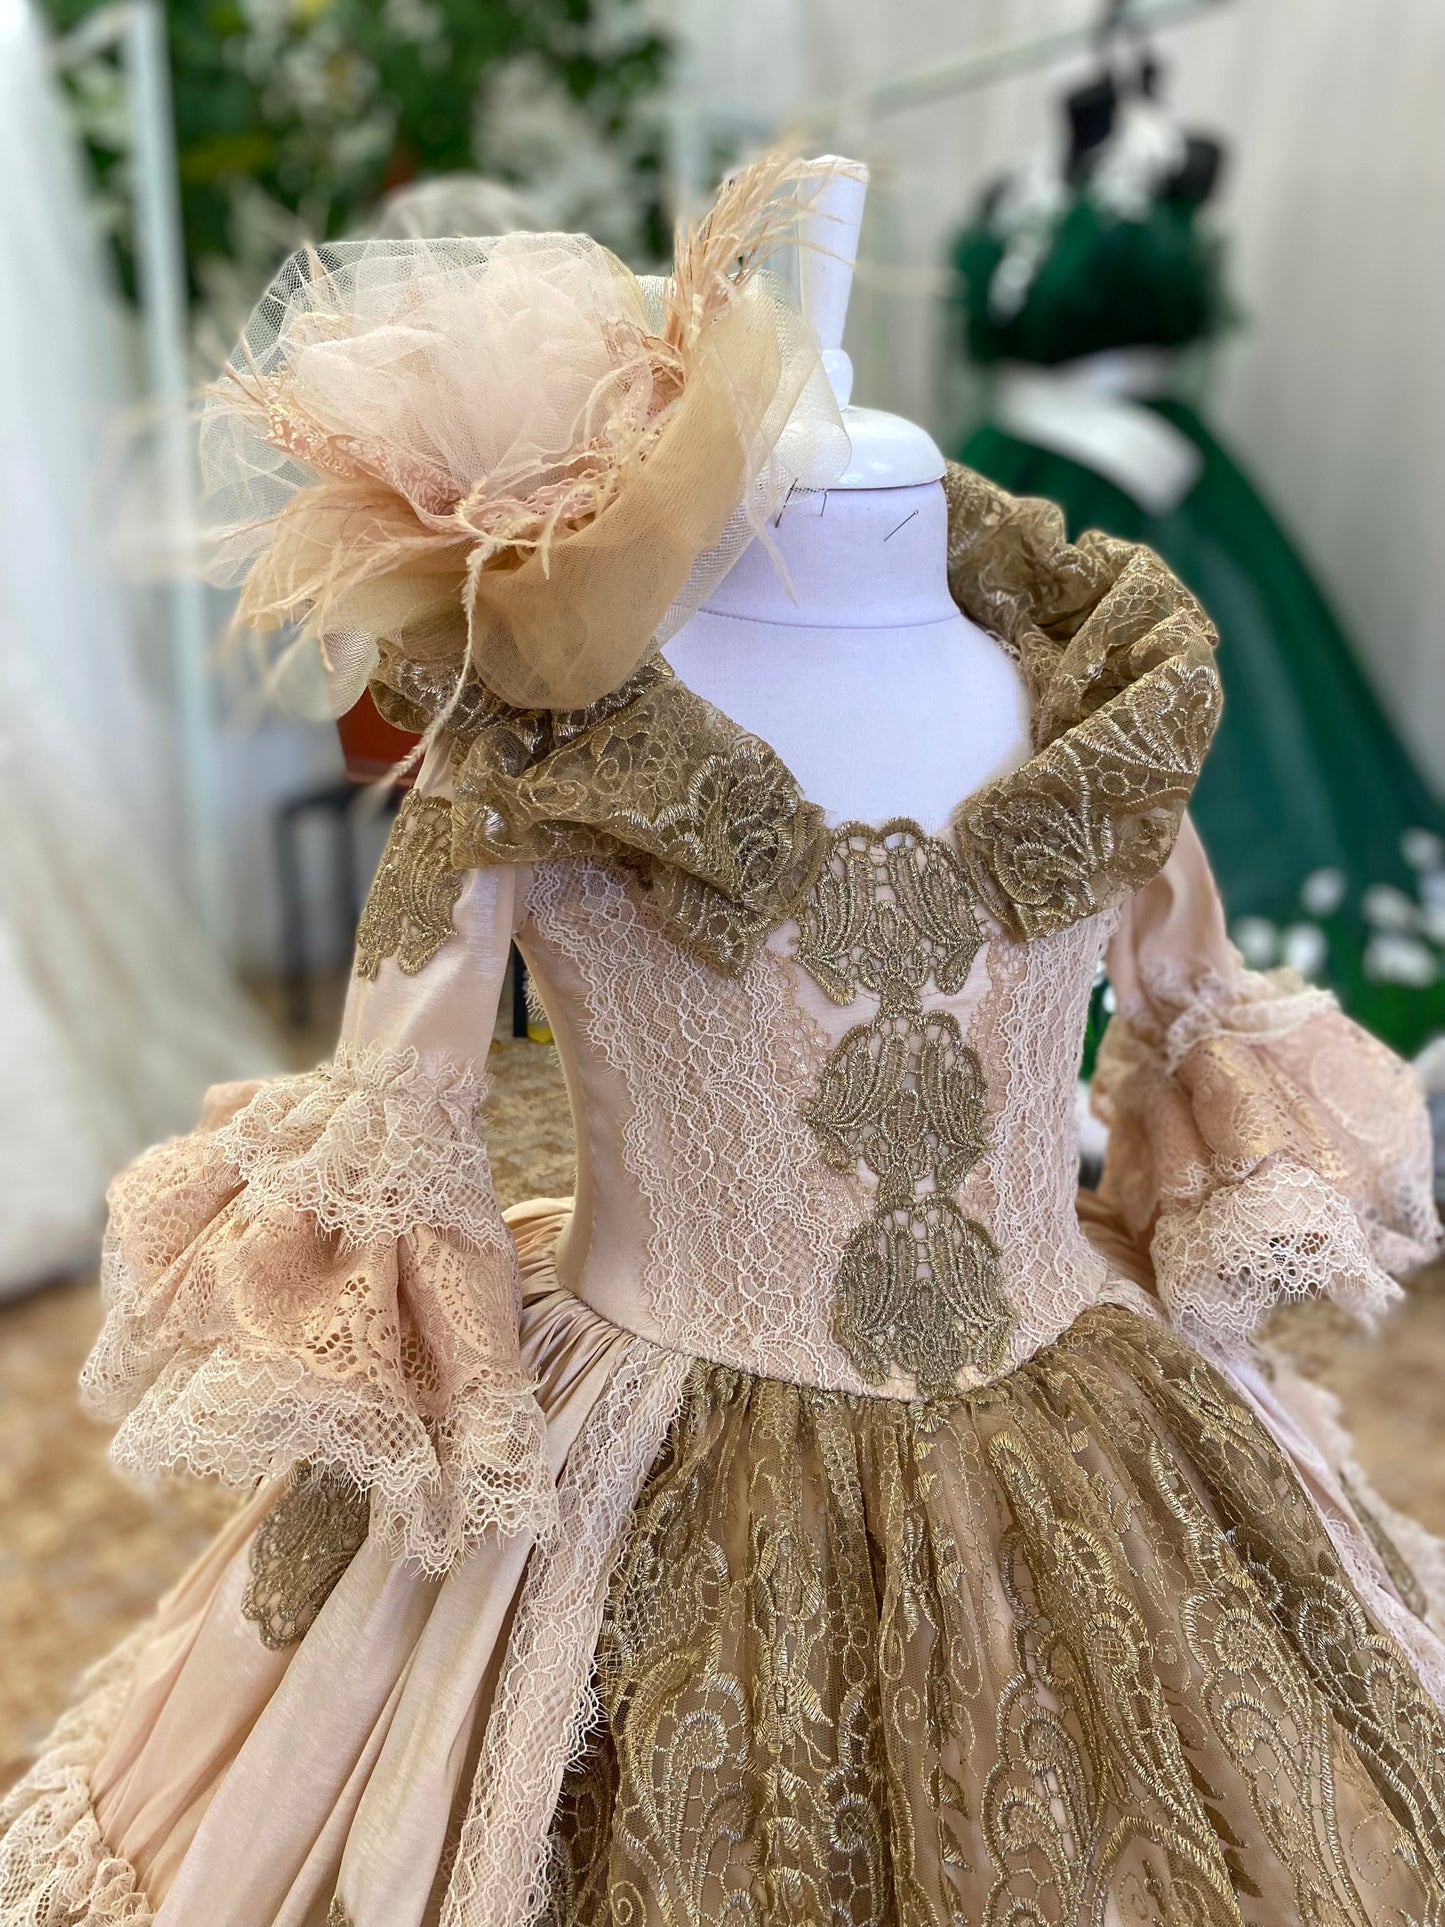 Peach Princess Dress With Golden Embroidery